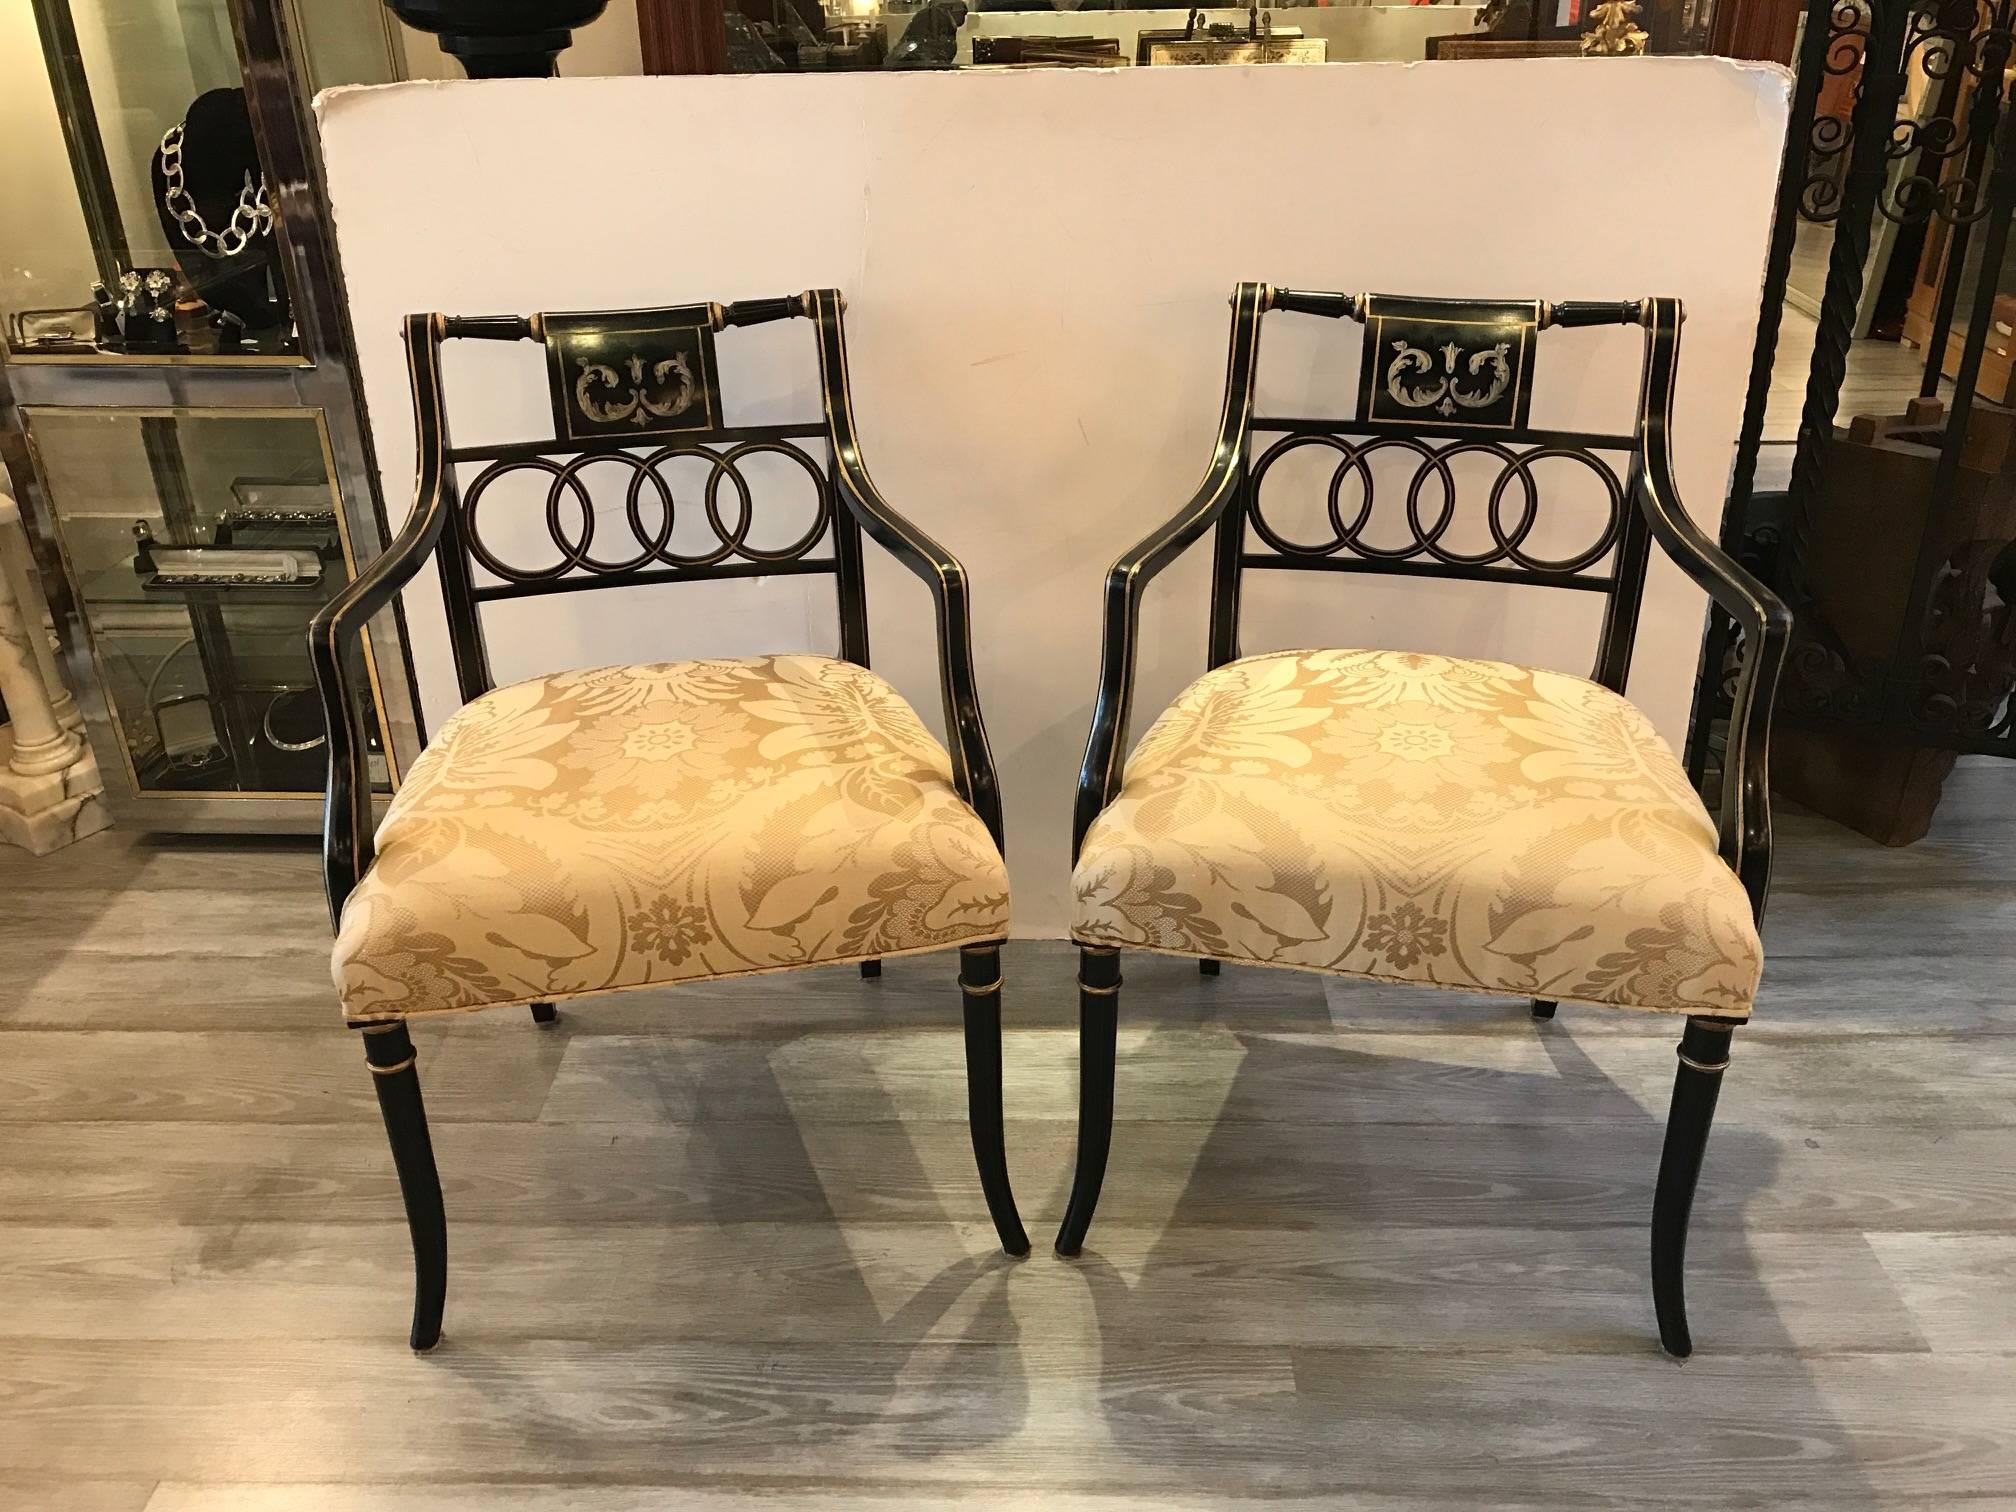 A pair of black Regency style armchairs made by the Baker Furniture Company. These chairs are a Baker Classic, these being a much earlier version with the hand-painted backs. The newly covered seats in a timeless soft gold damask.
The original set